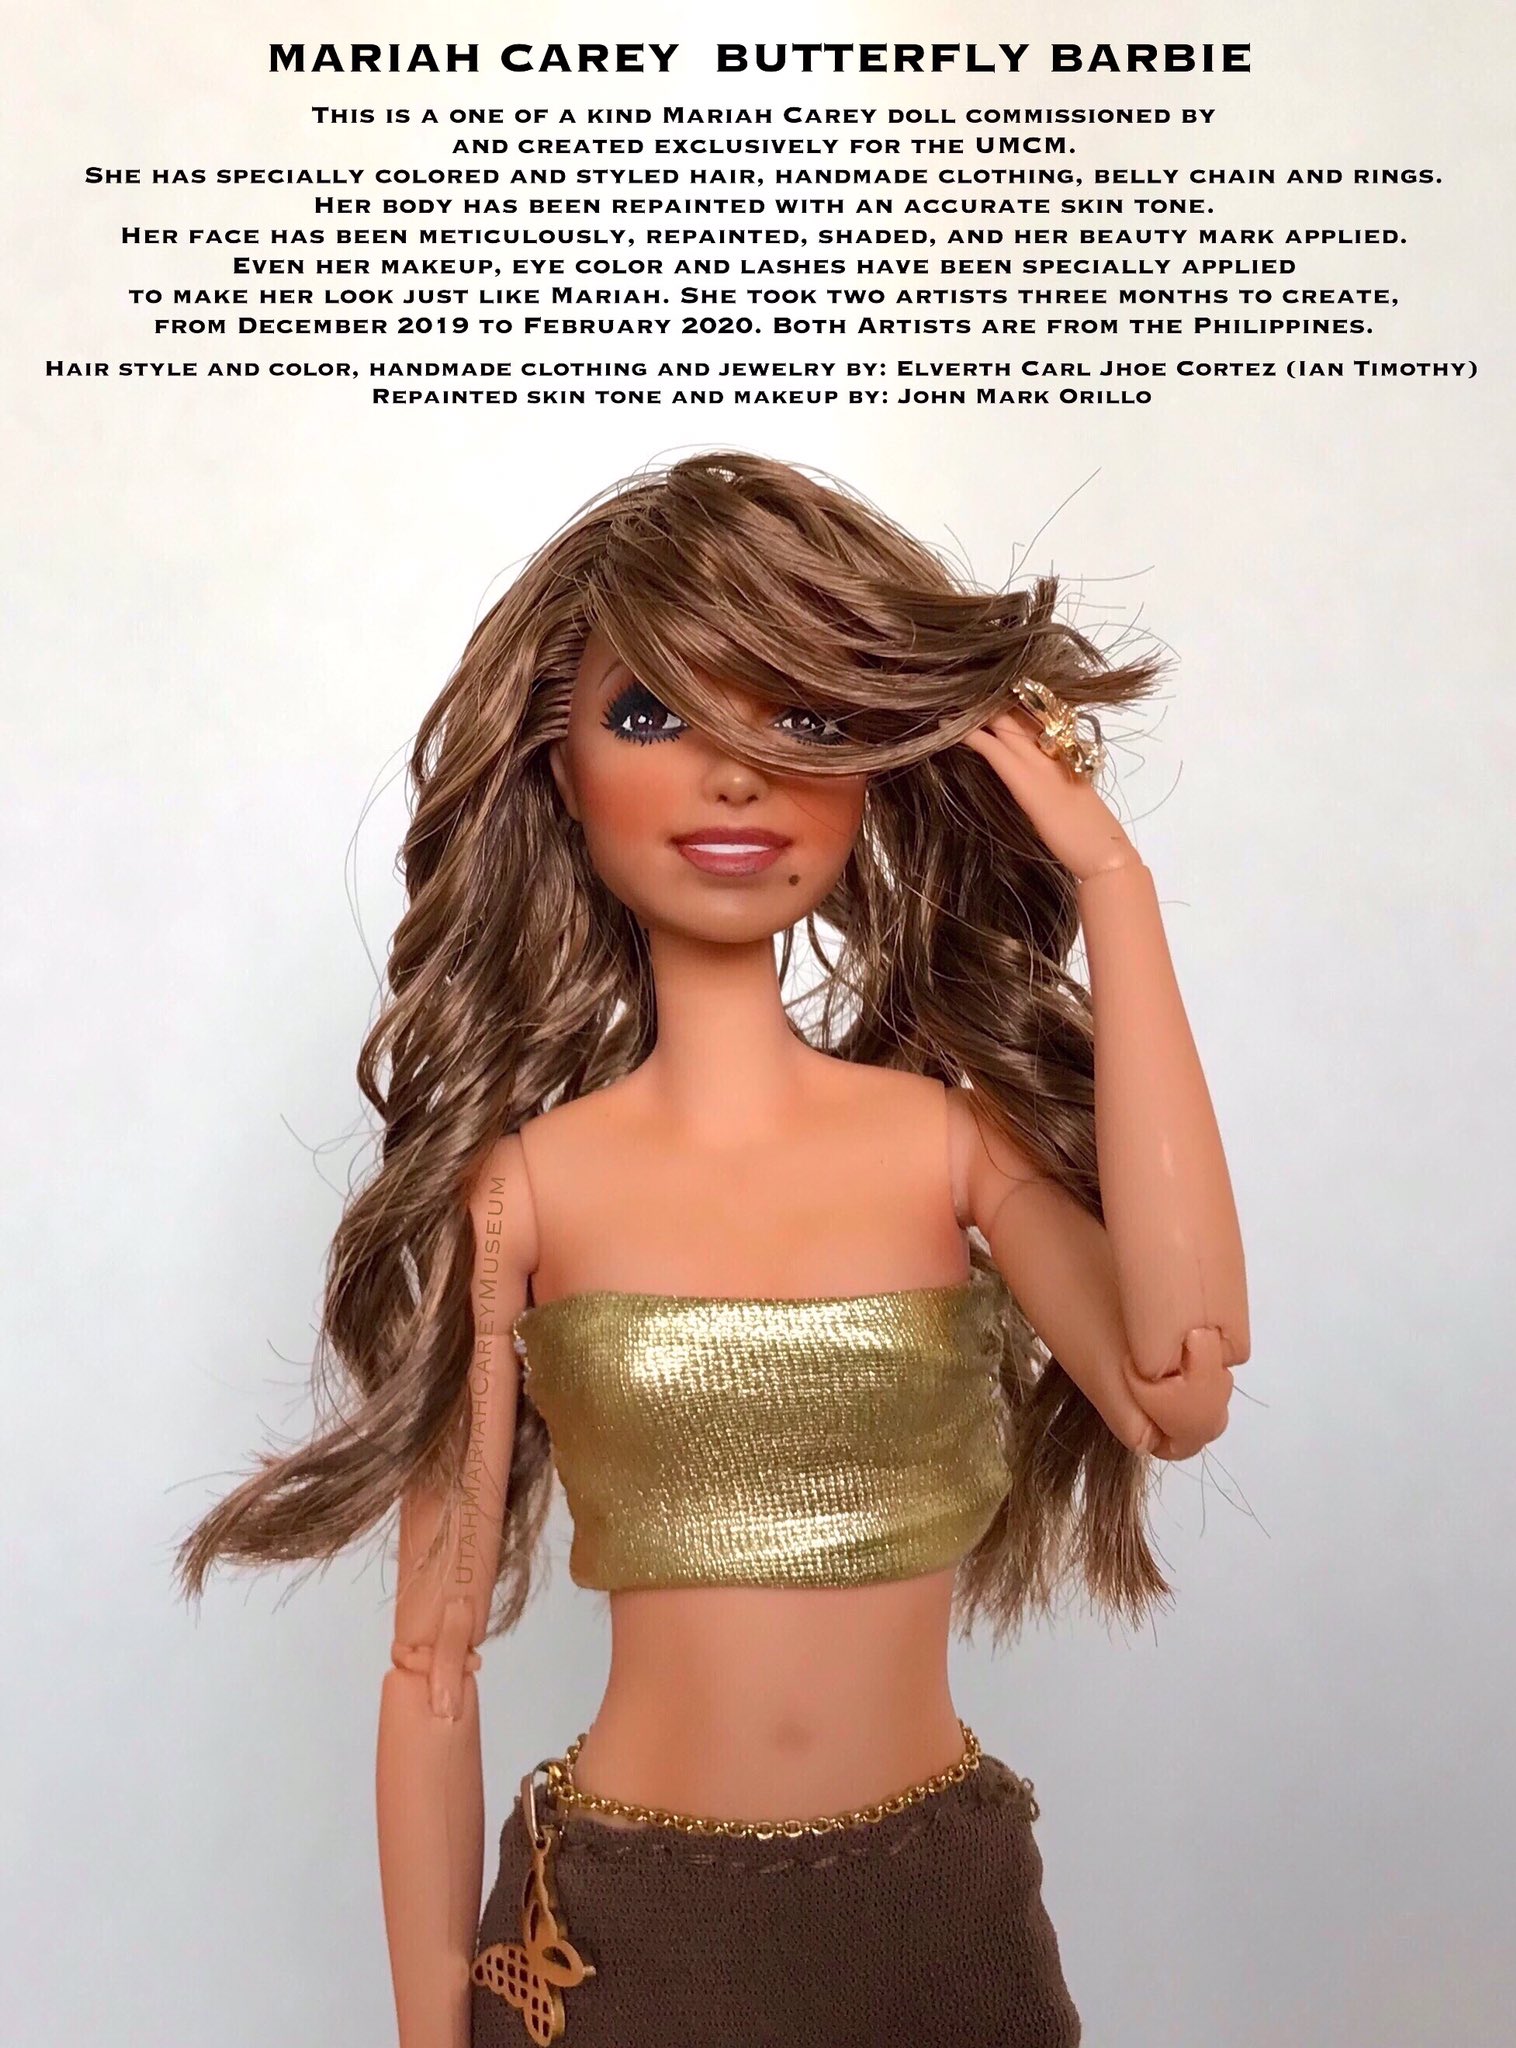 handboeien Menagerry artikel Utah Mariah Carey Museum on Twitter: "The UMCM is proud to debut the @ MariahCarey Butterfly Barbie. This “one of a kind” doll was created  exclusively for us. Attention to detail brought this